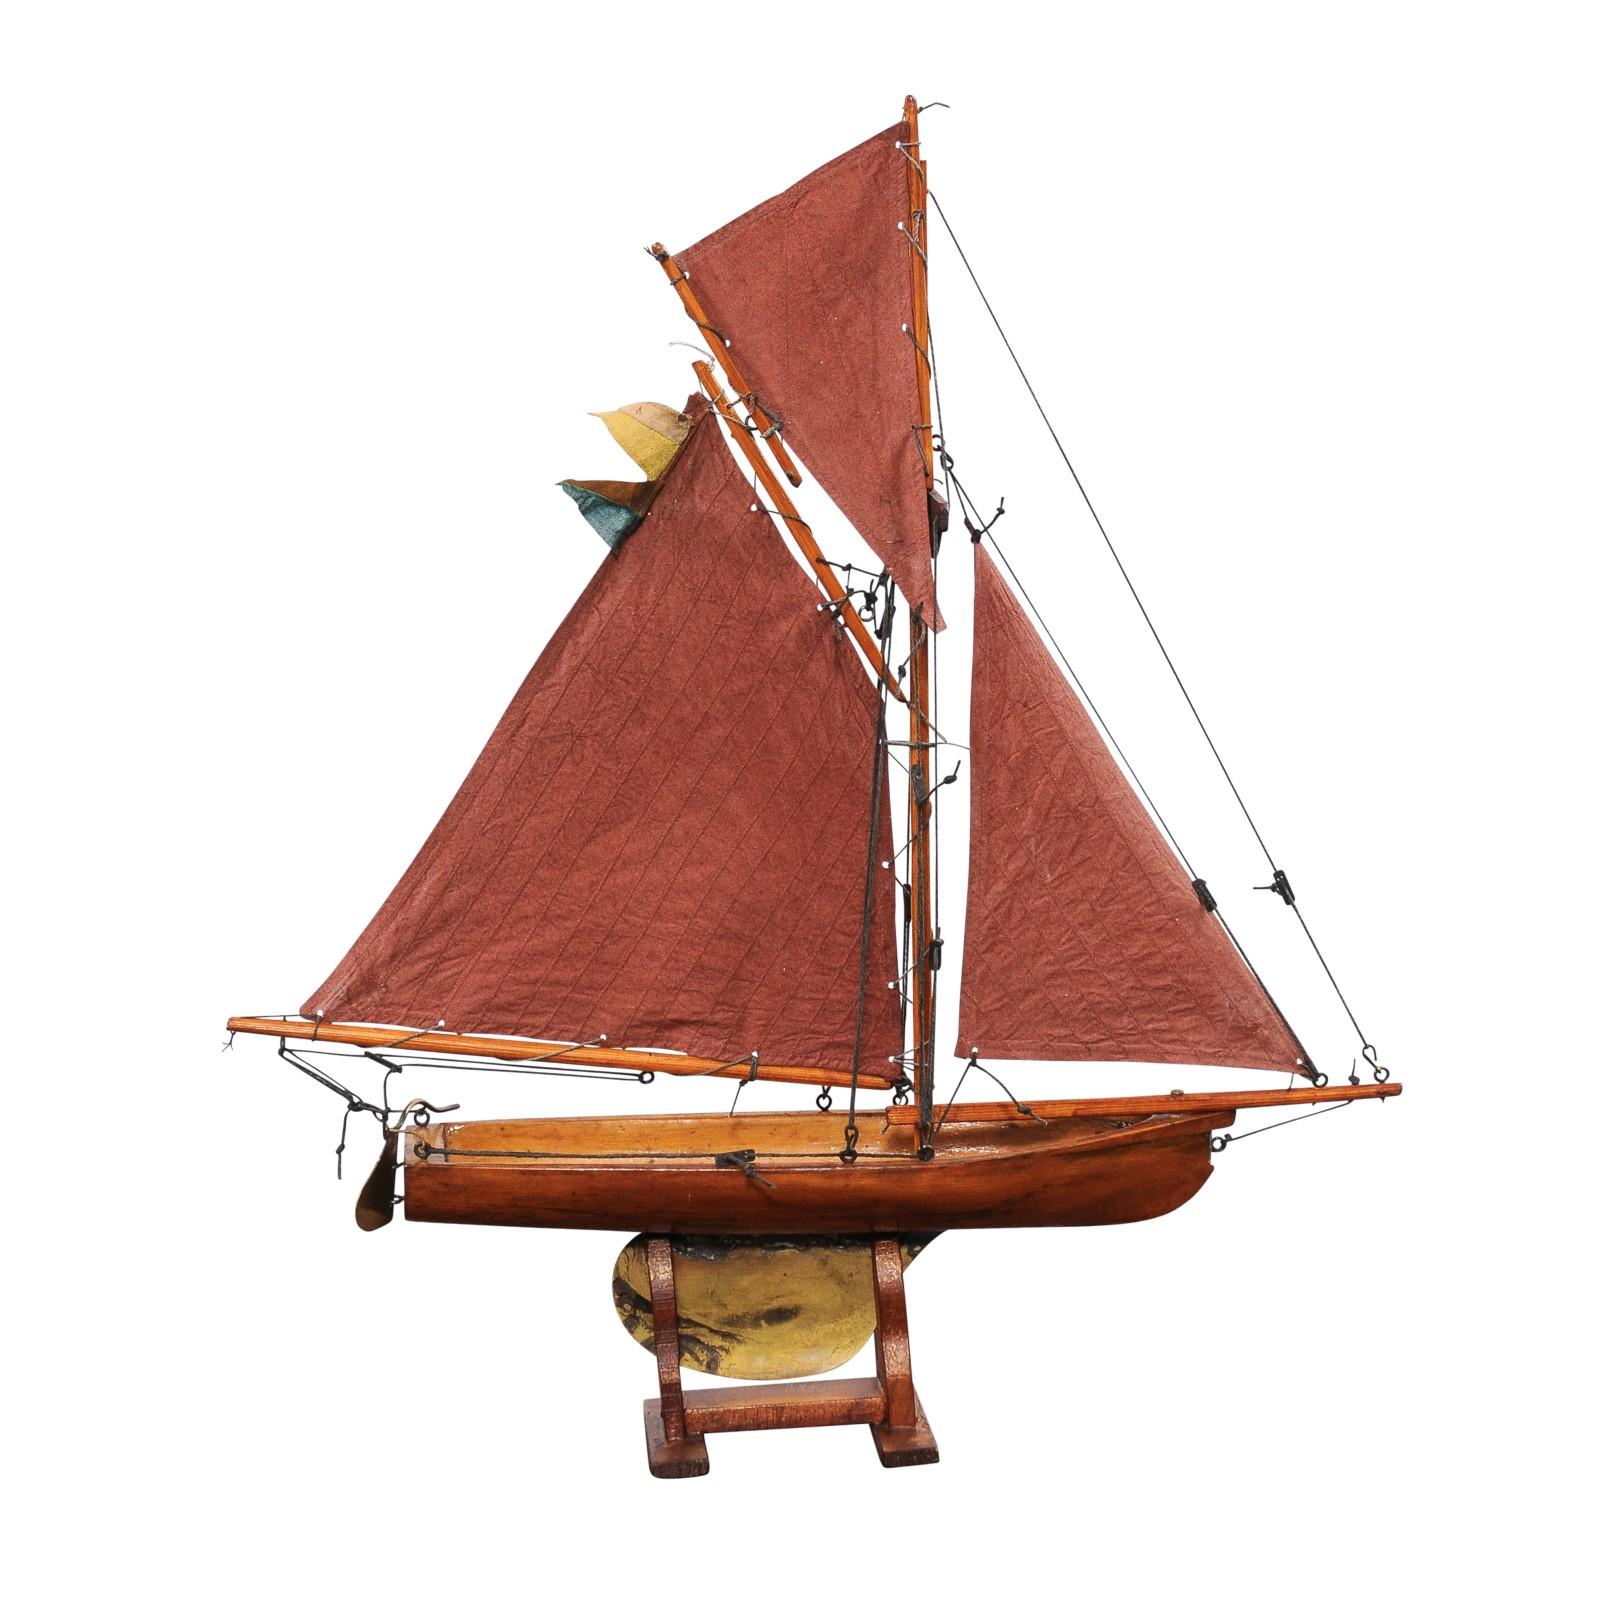 An English George V period Gaff Cutter pond yacht from circa 1920 with red sails on custom base. This elegant English George V period Gaff Cutter pond yacht, dating back to circa 1920, is a striking blend of nautical history and artistic